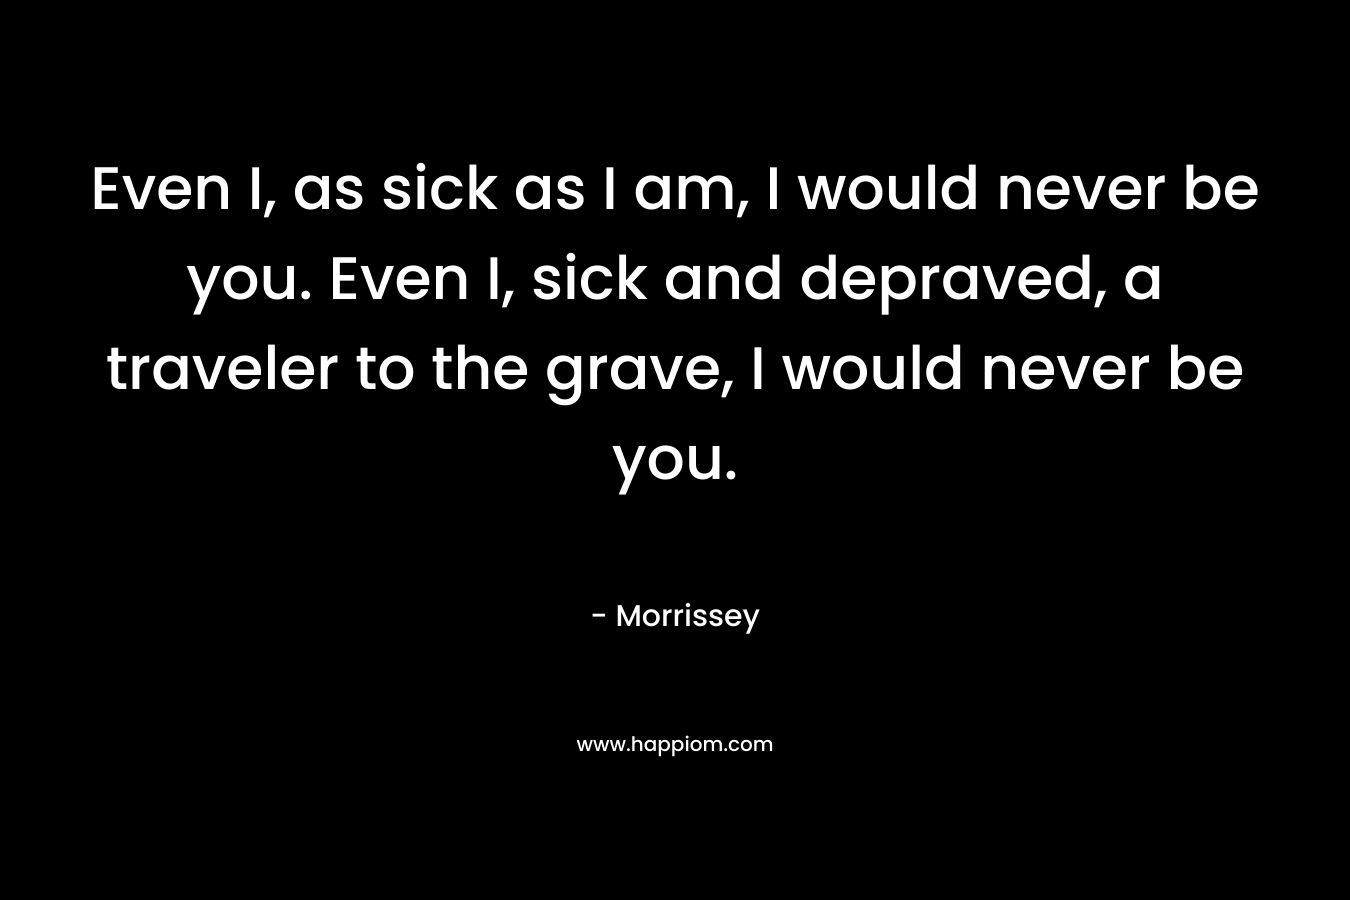 Even I, as sick as I am, I would never be you. Even I, sick and depraved, a traveler to the grave, I would never be you.